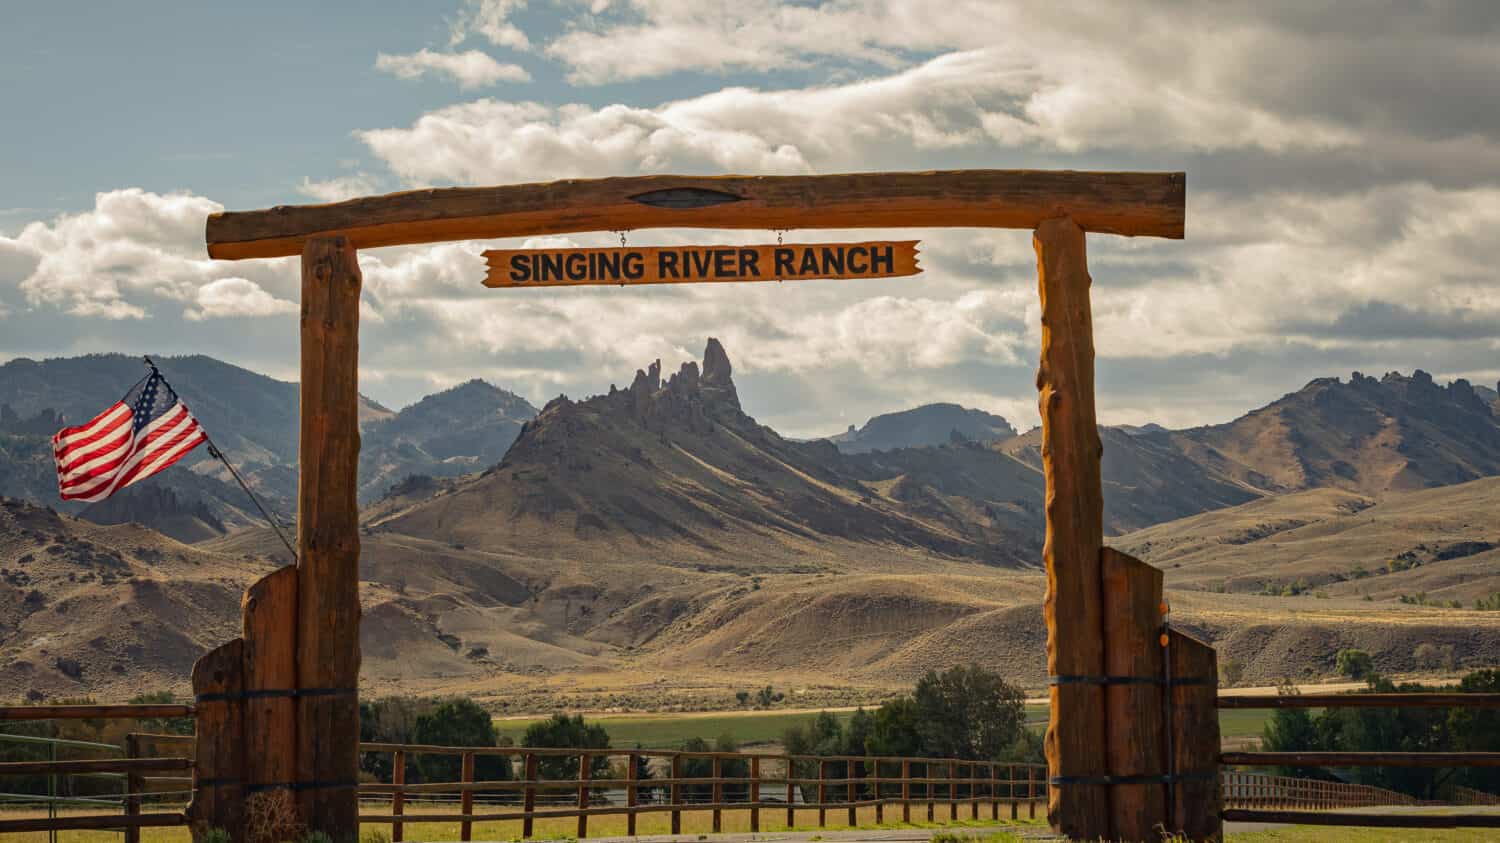 Entrance to a ranch in Cody Wyoming, USA. Beautiful Mountain range in the background.